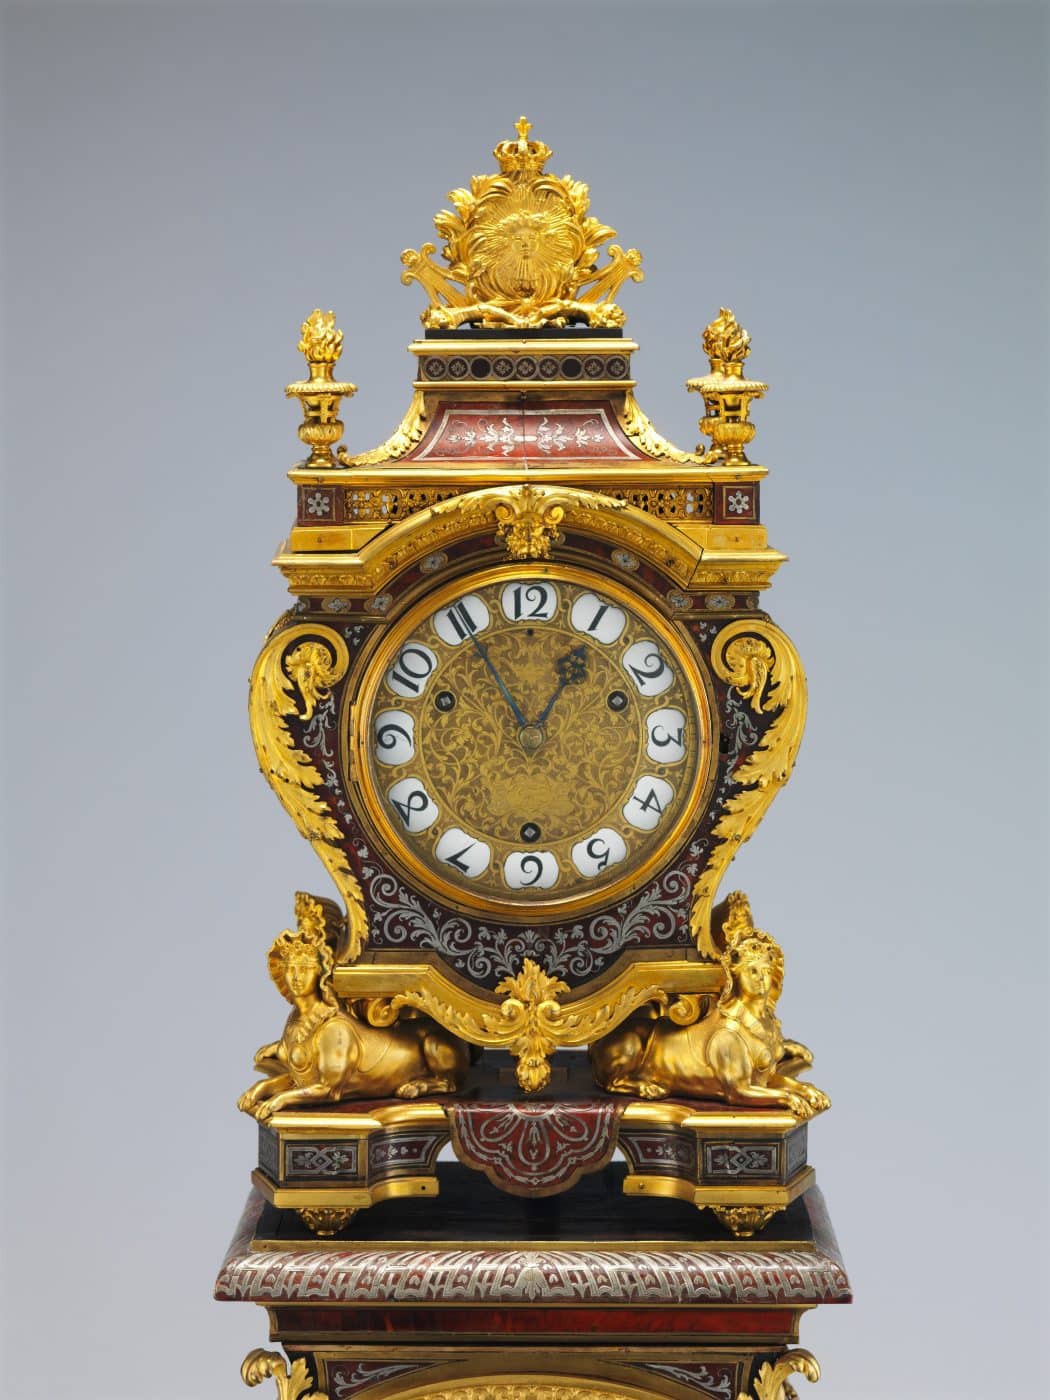 Clock with pedestal with a similar shape to the character "Cogsworth" from Beauty and the Beast